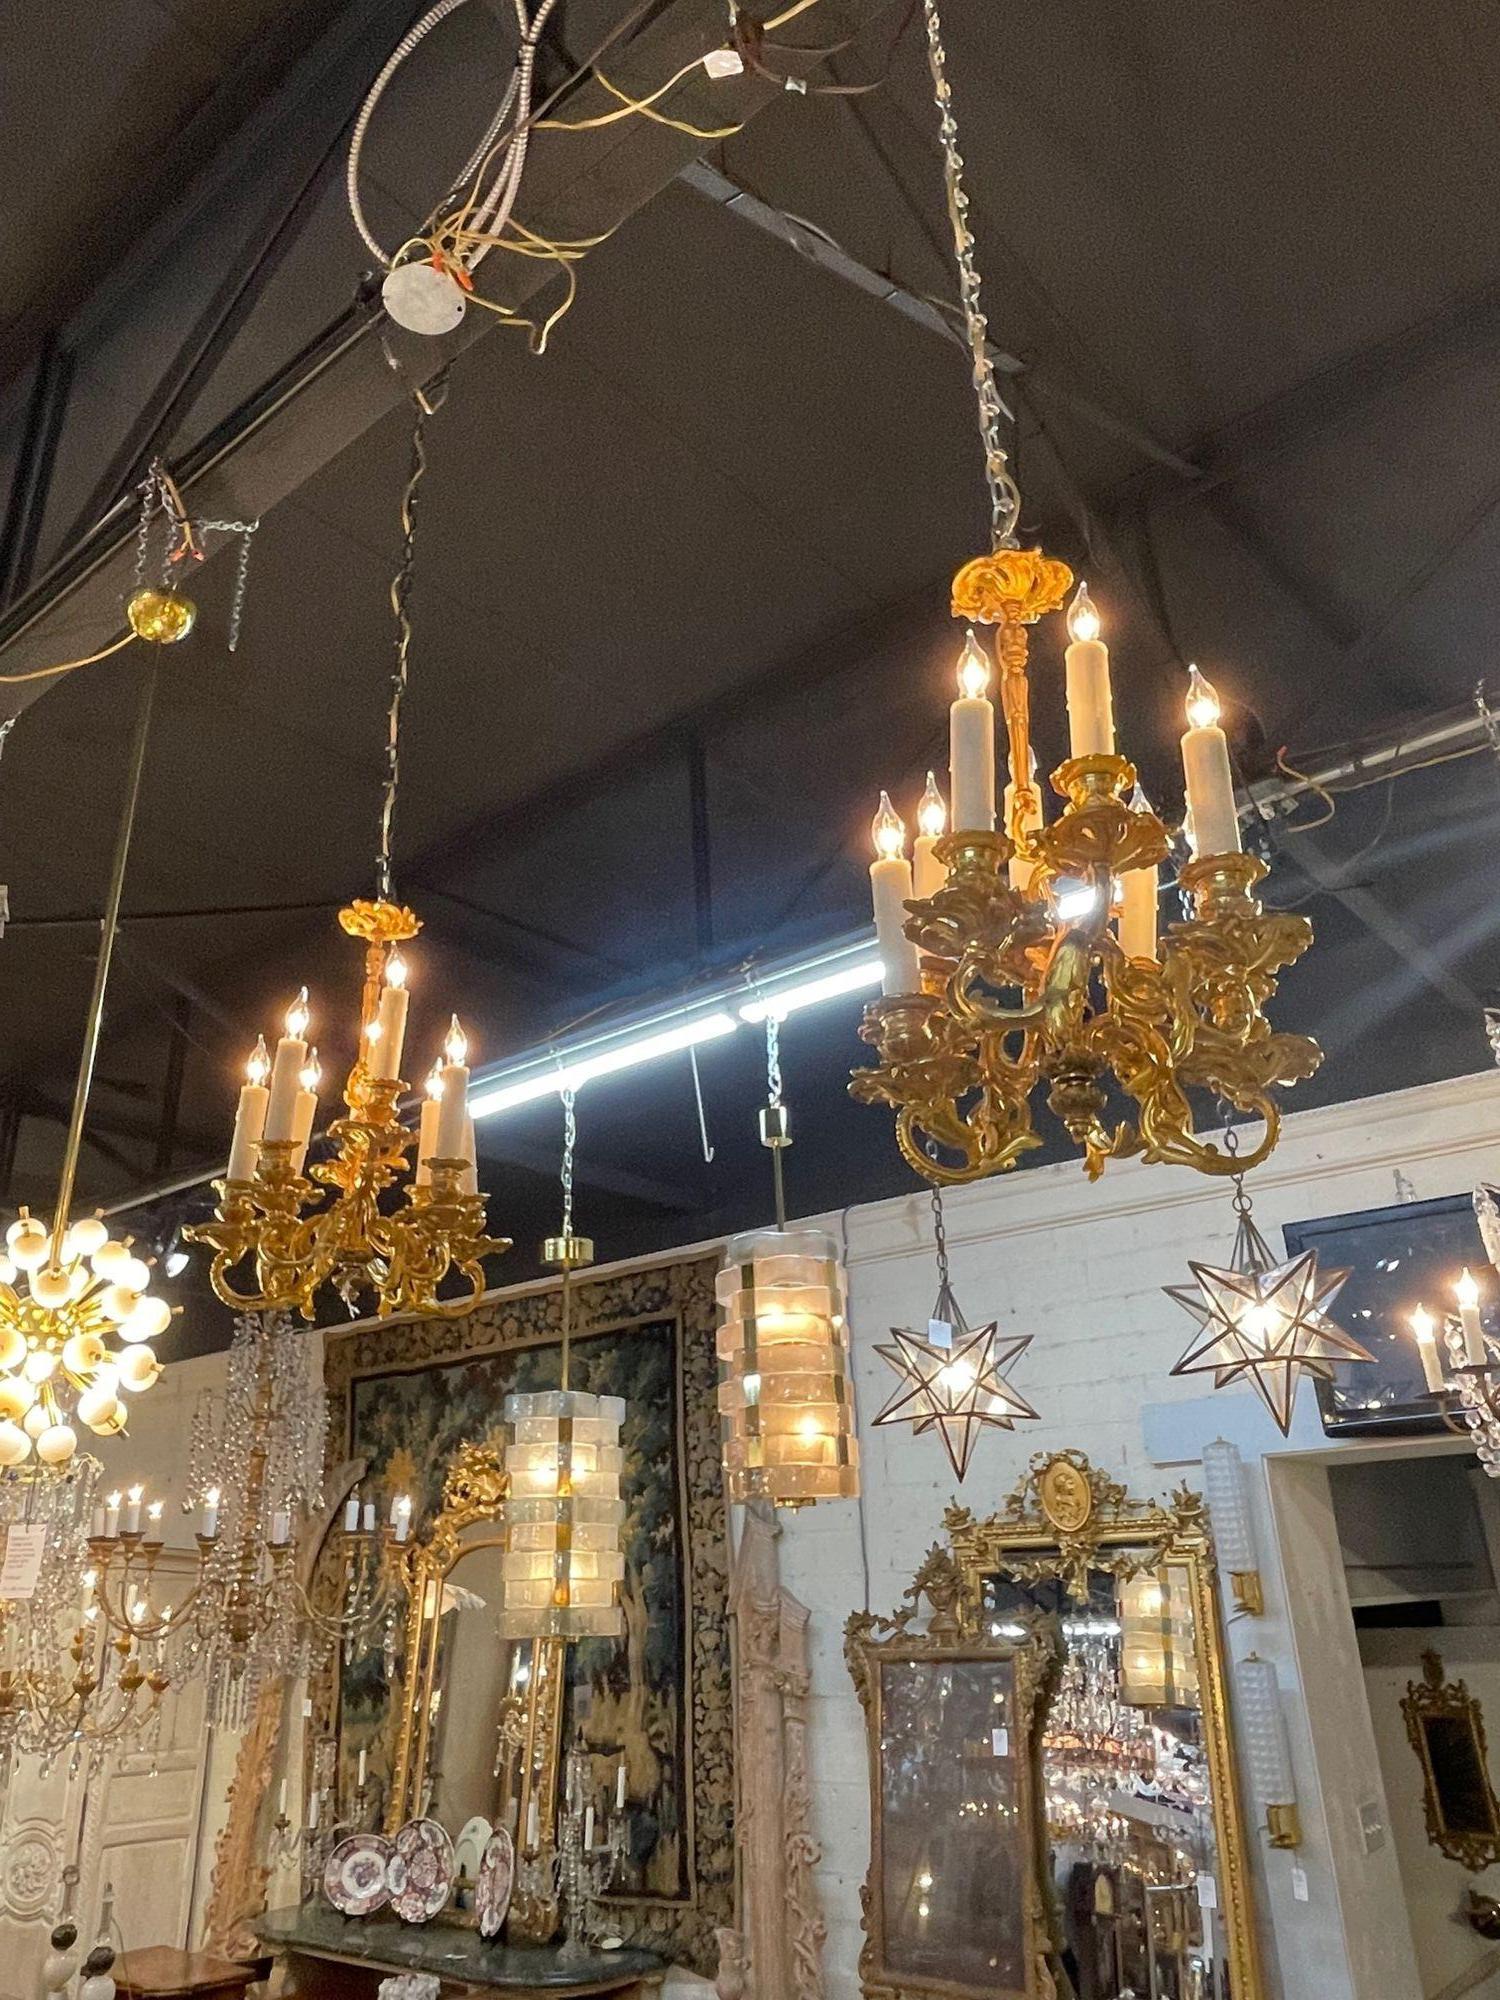 Petite French gilt bronze Louis XVI style chandelier with 8 lights. Circa 1880. A timeless and classic touch for a fine interior. 
 